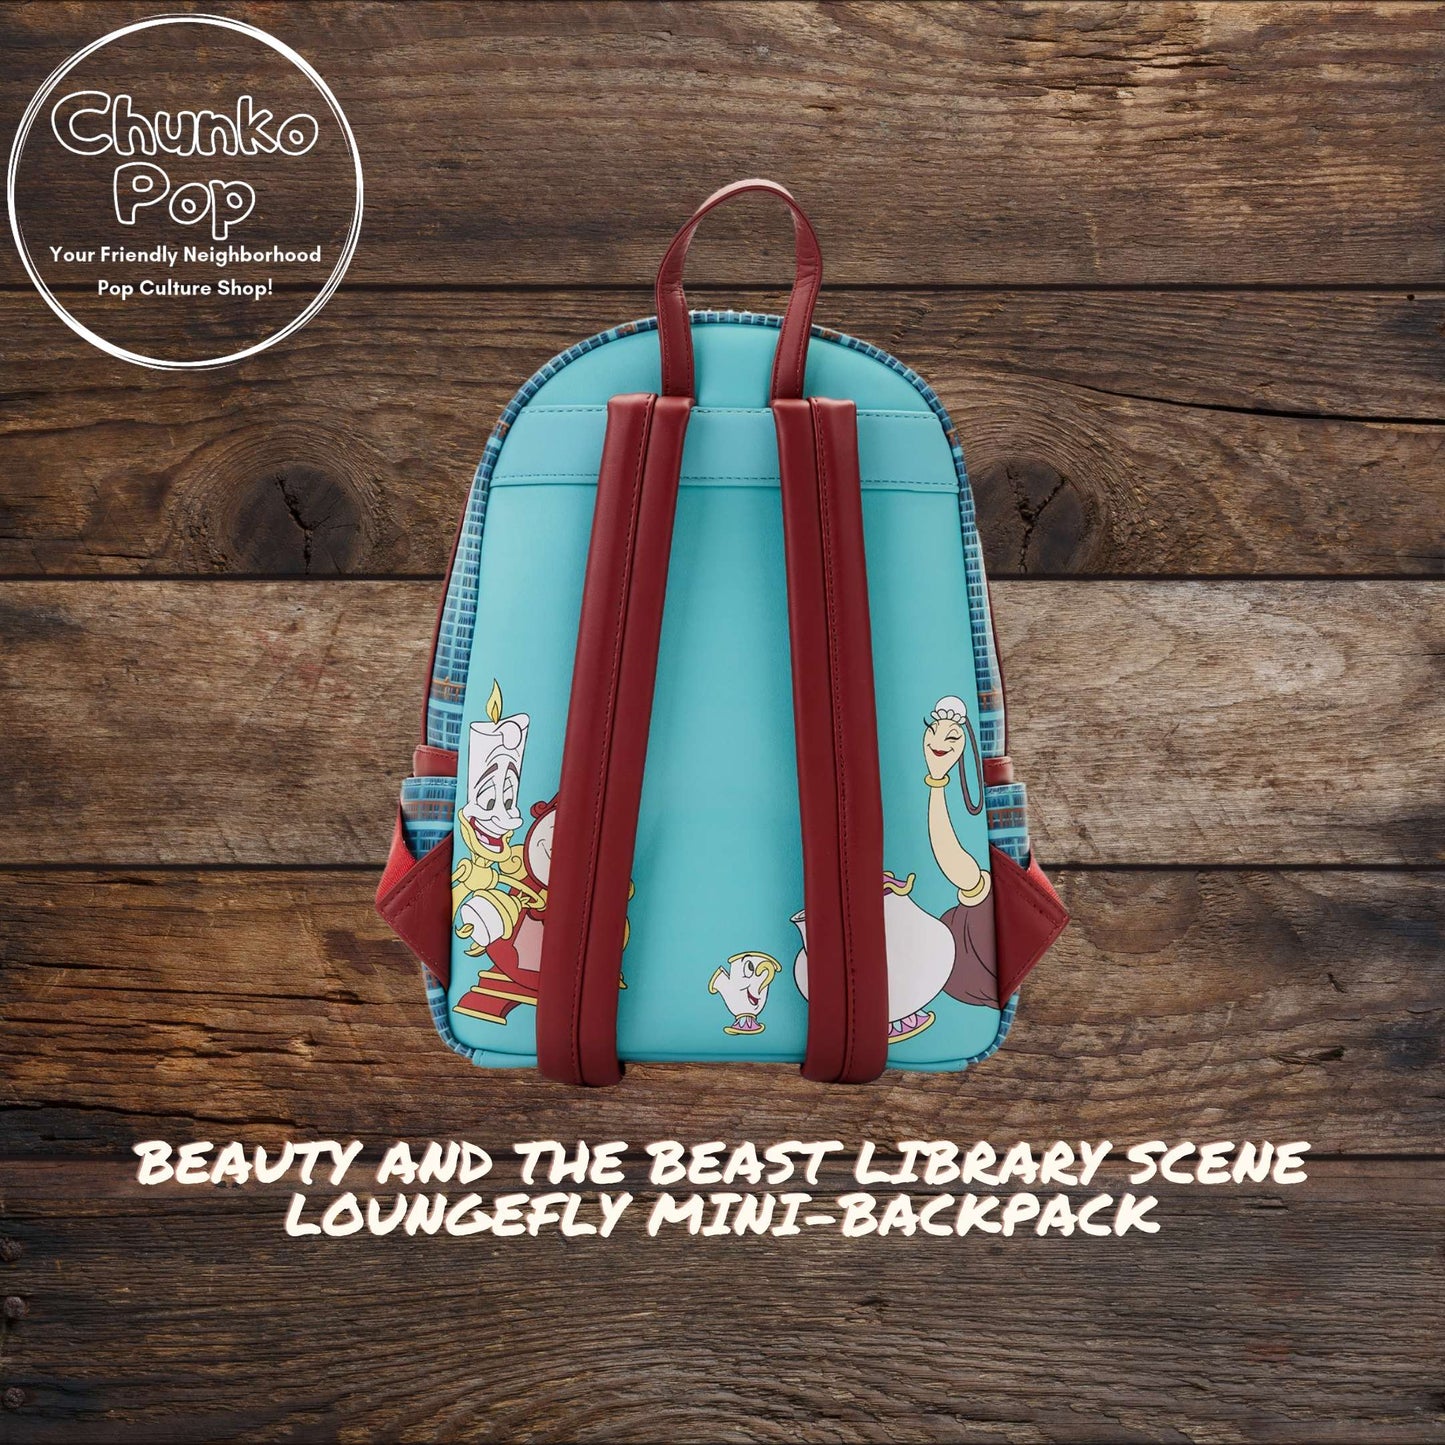 Beauty and the Beast Library Scene LoungeFly Mini-Backpack